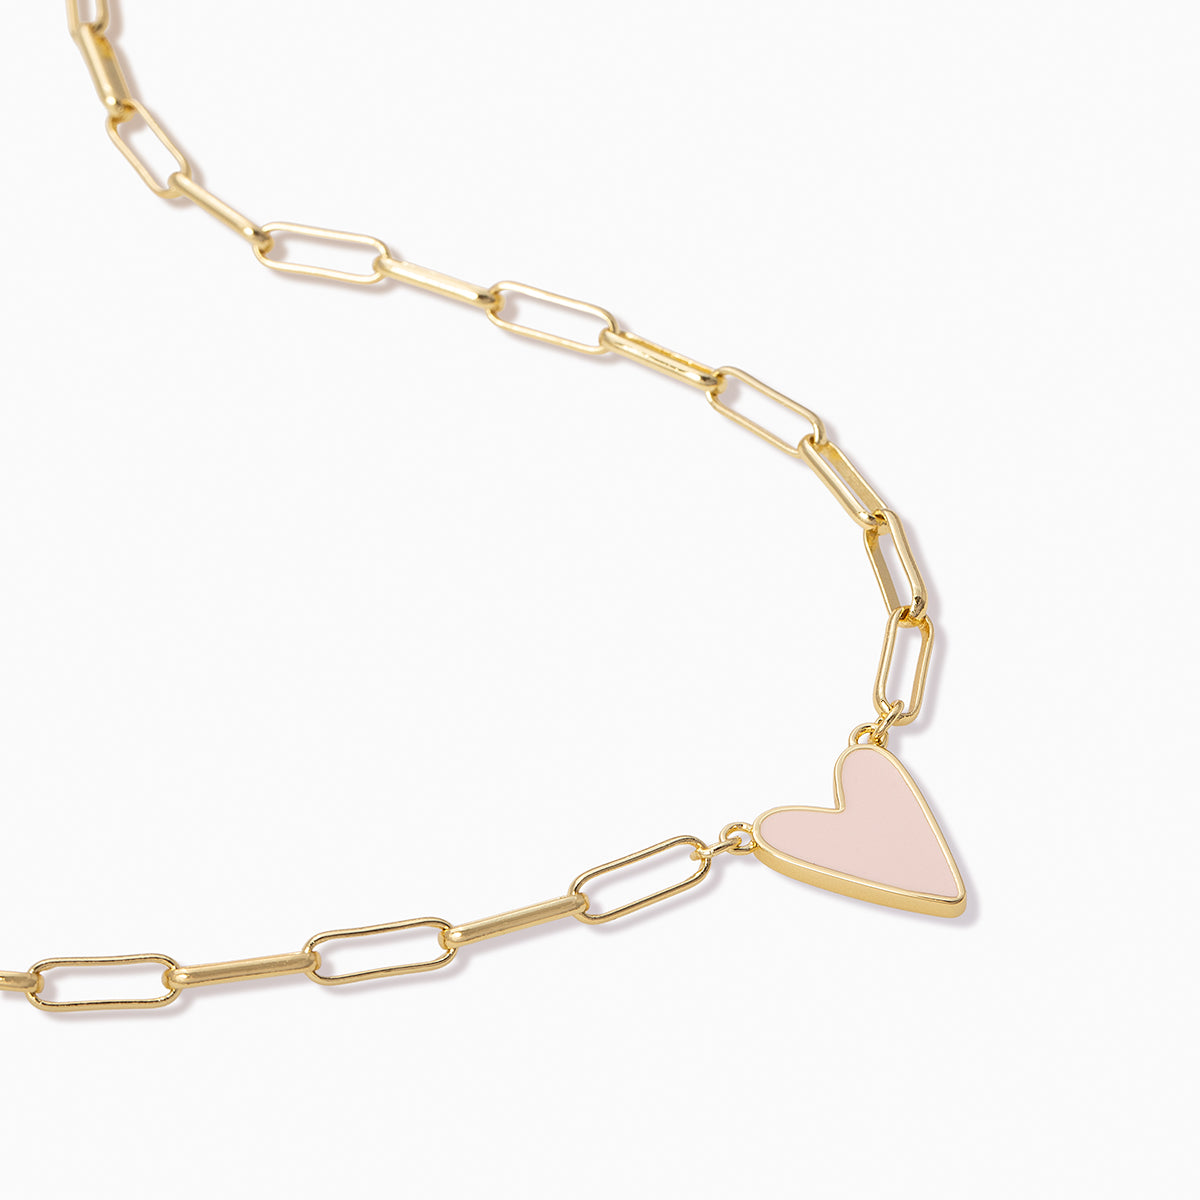 Enamel Heart Necklace | Gold Off White | Product Detail Image | Uncommon James